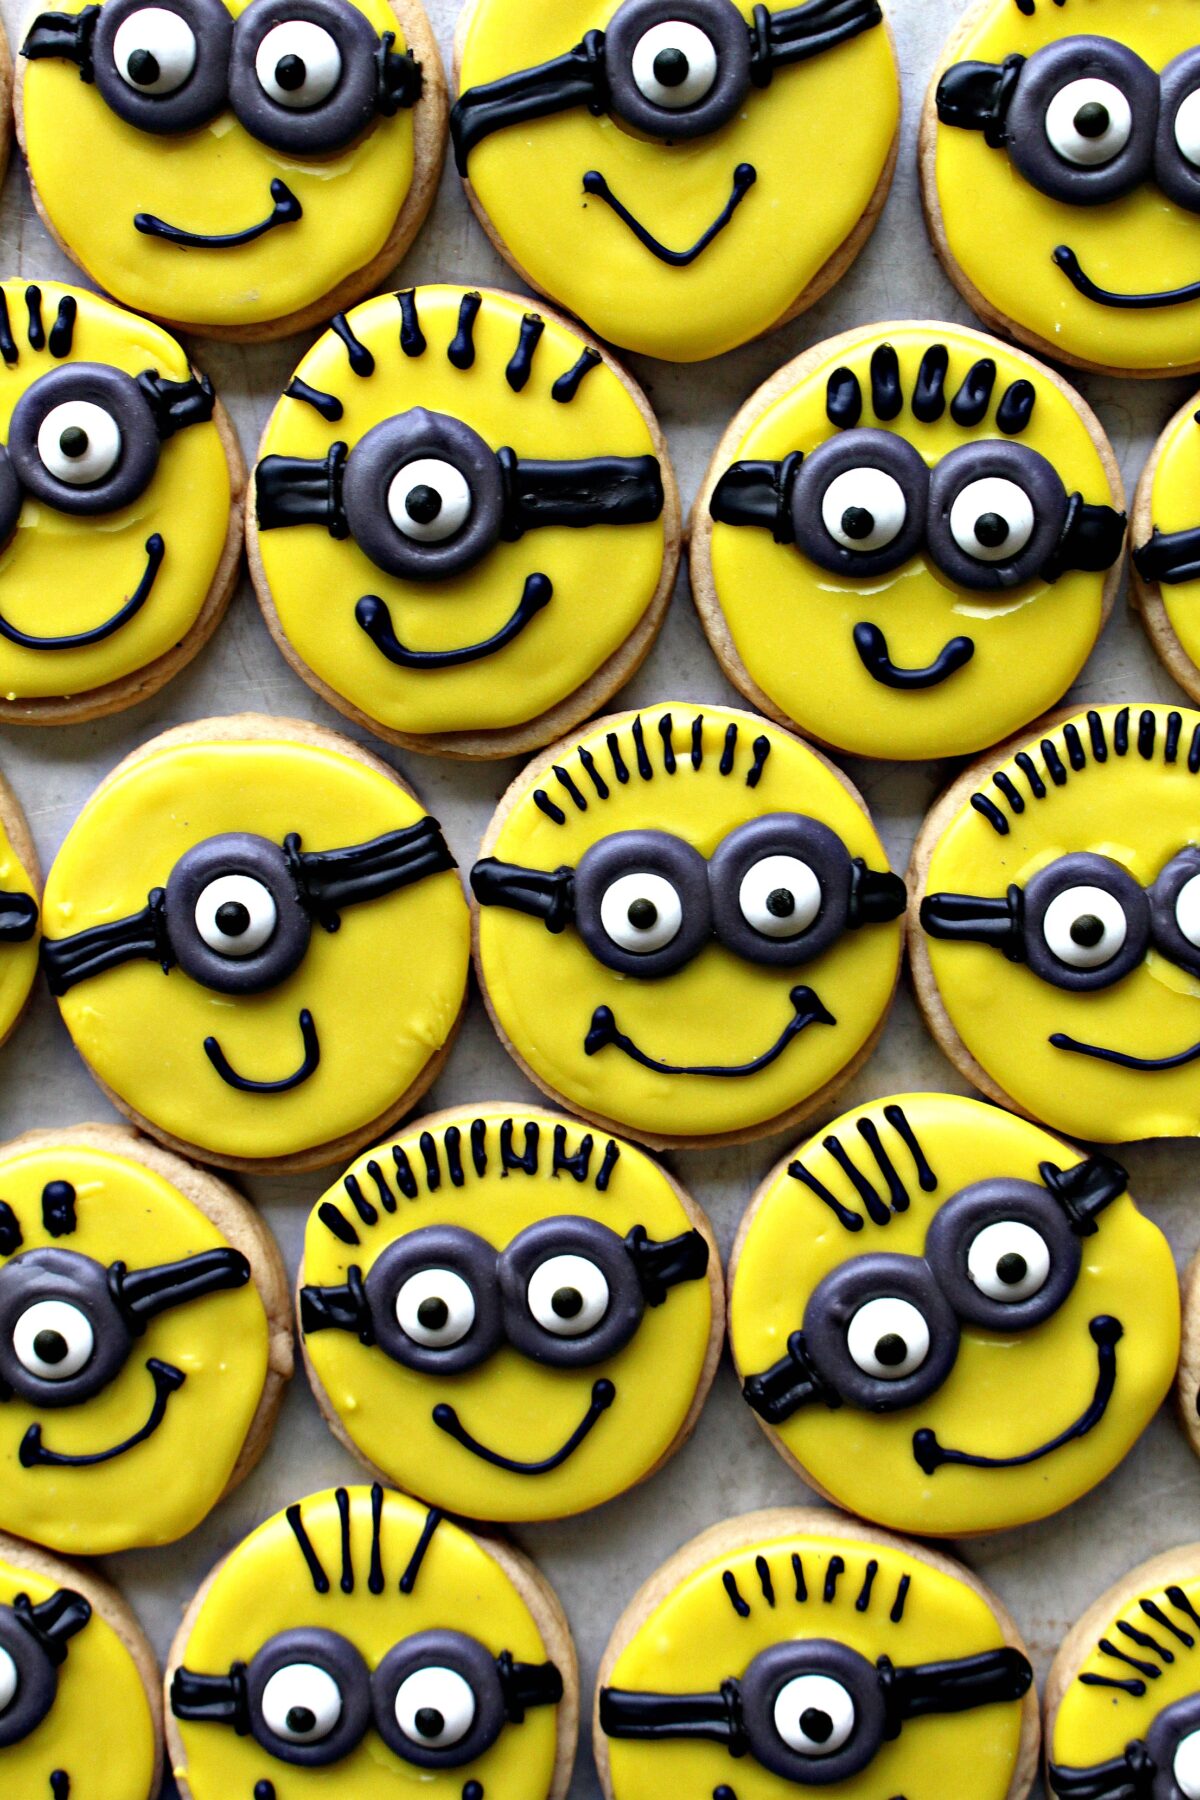 Minion Sugar Cookies with yellow faces and glasses with candy eyes.